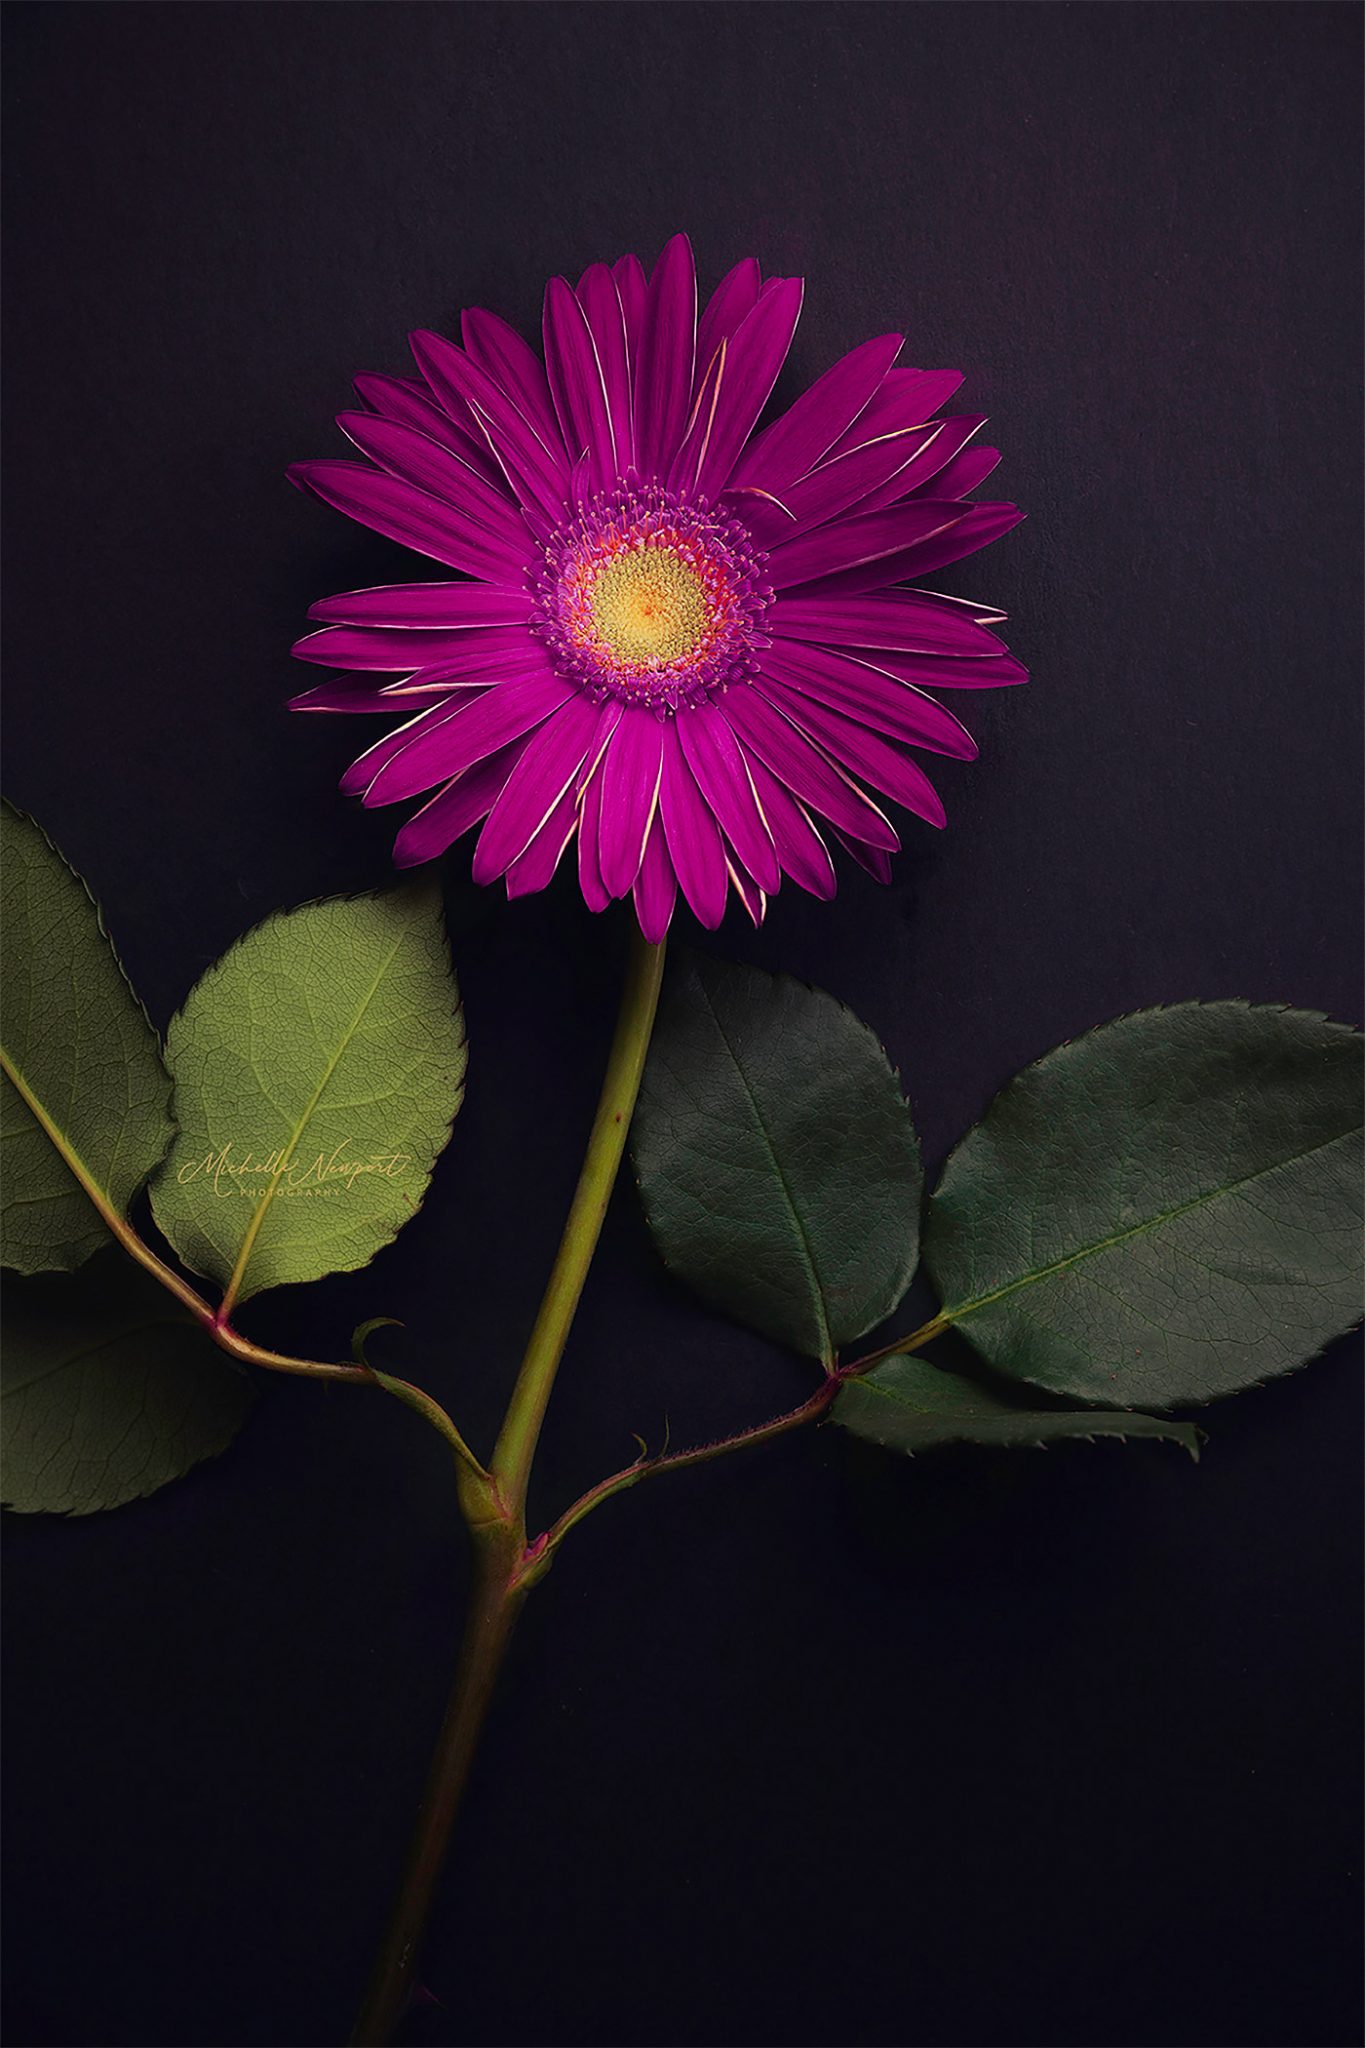 Fine Art Flower Photography by Michelle Newport | Daily design ...